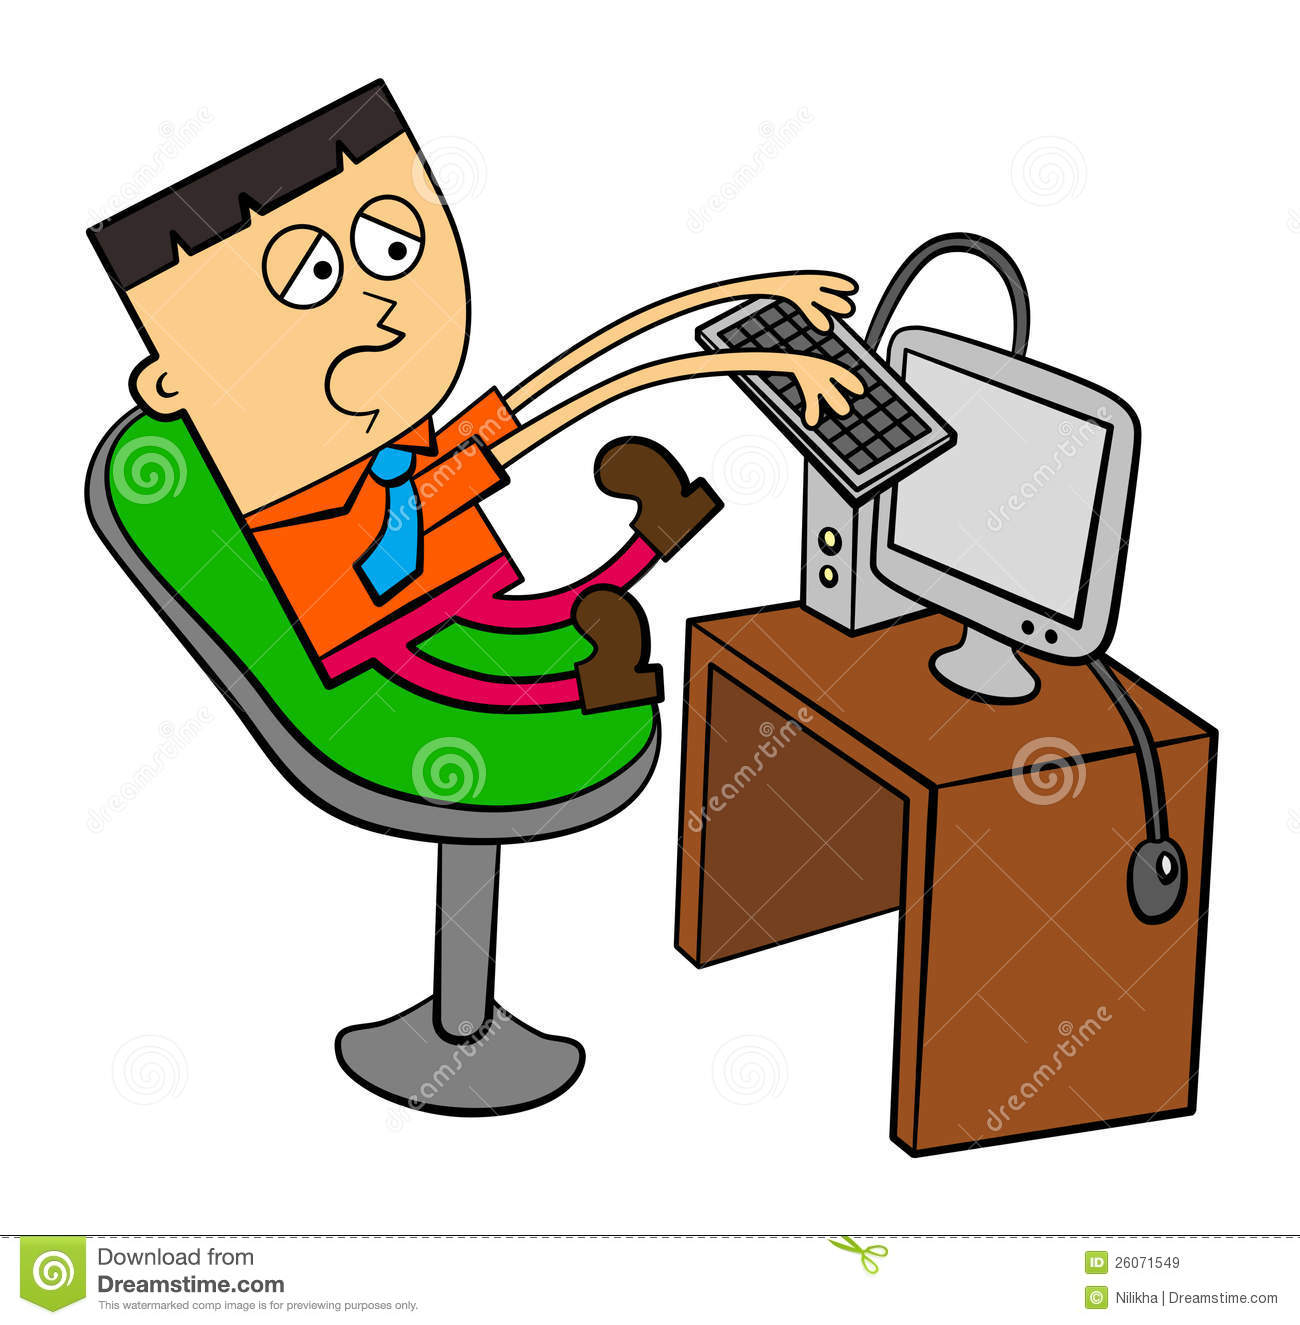 Busy Work Royalty Free Stock Images   Image  26071549